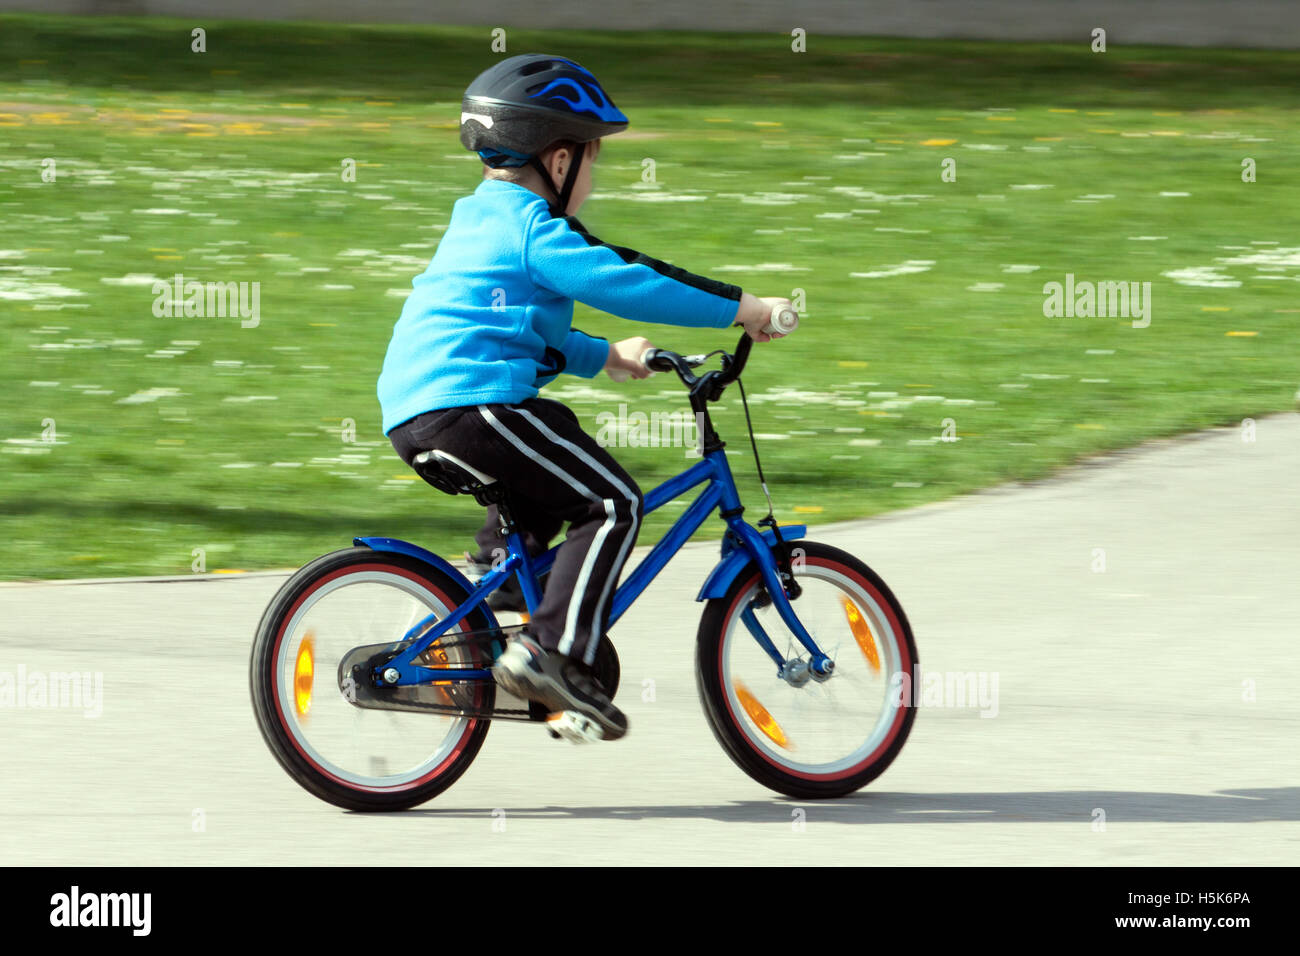 child on a bicycle at asphalt road on traffic playground - blurred panning method Stock Photo